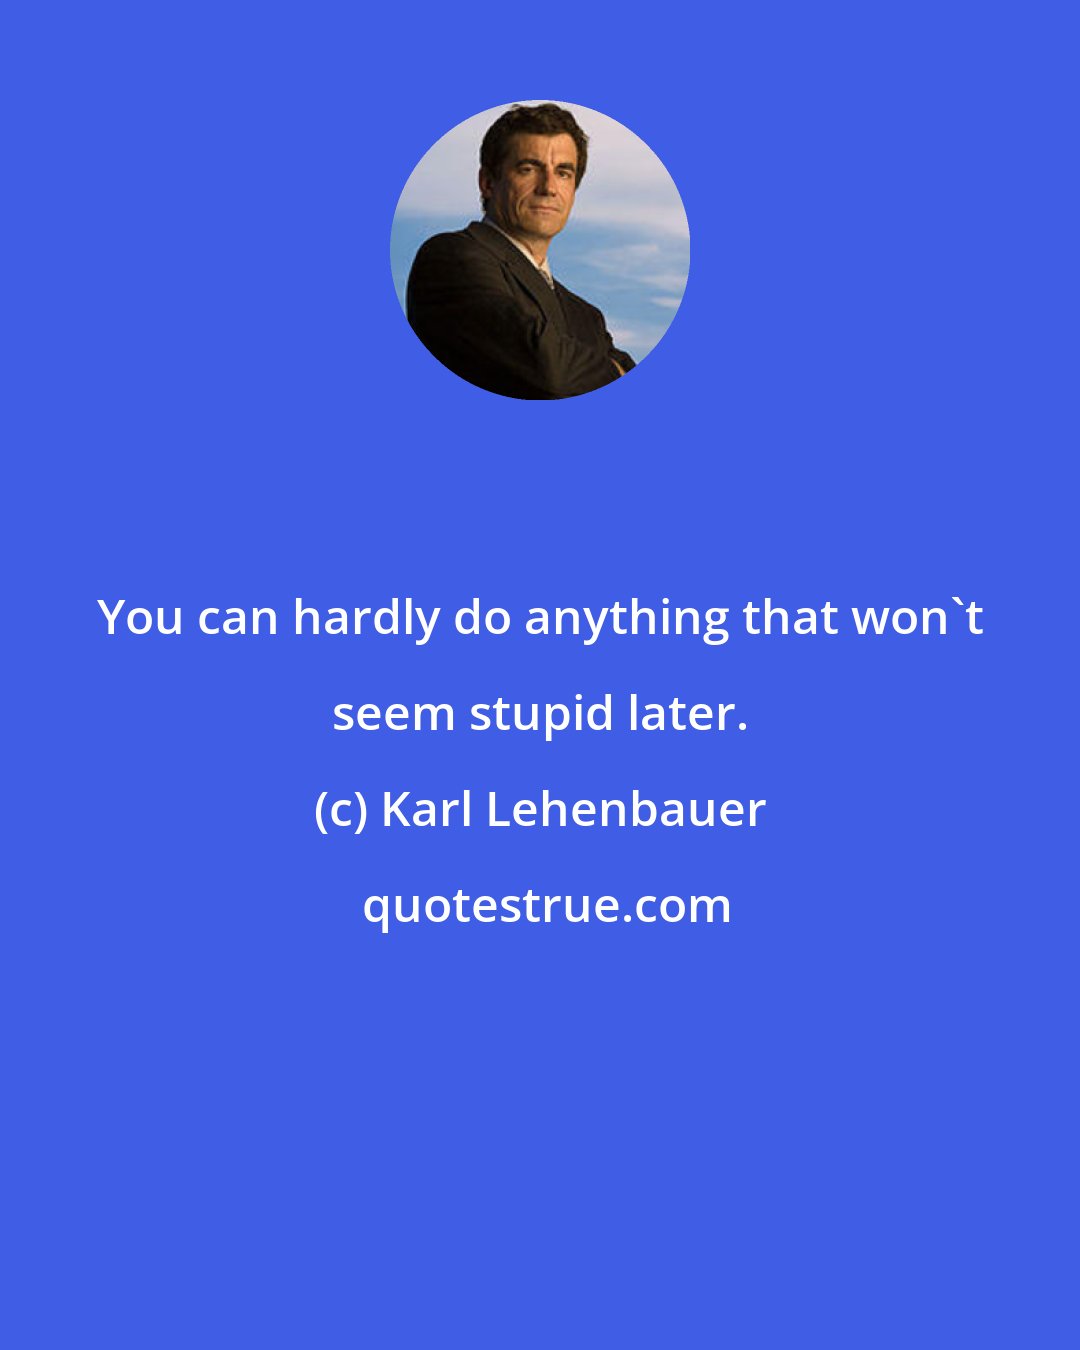 Karl Lehenbauer: You can hardly do anything that won't seem stupid later.